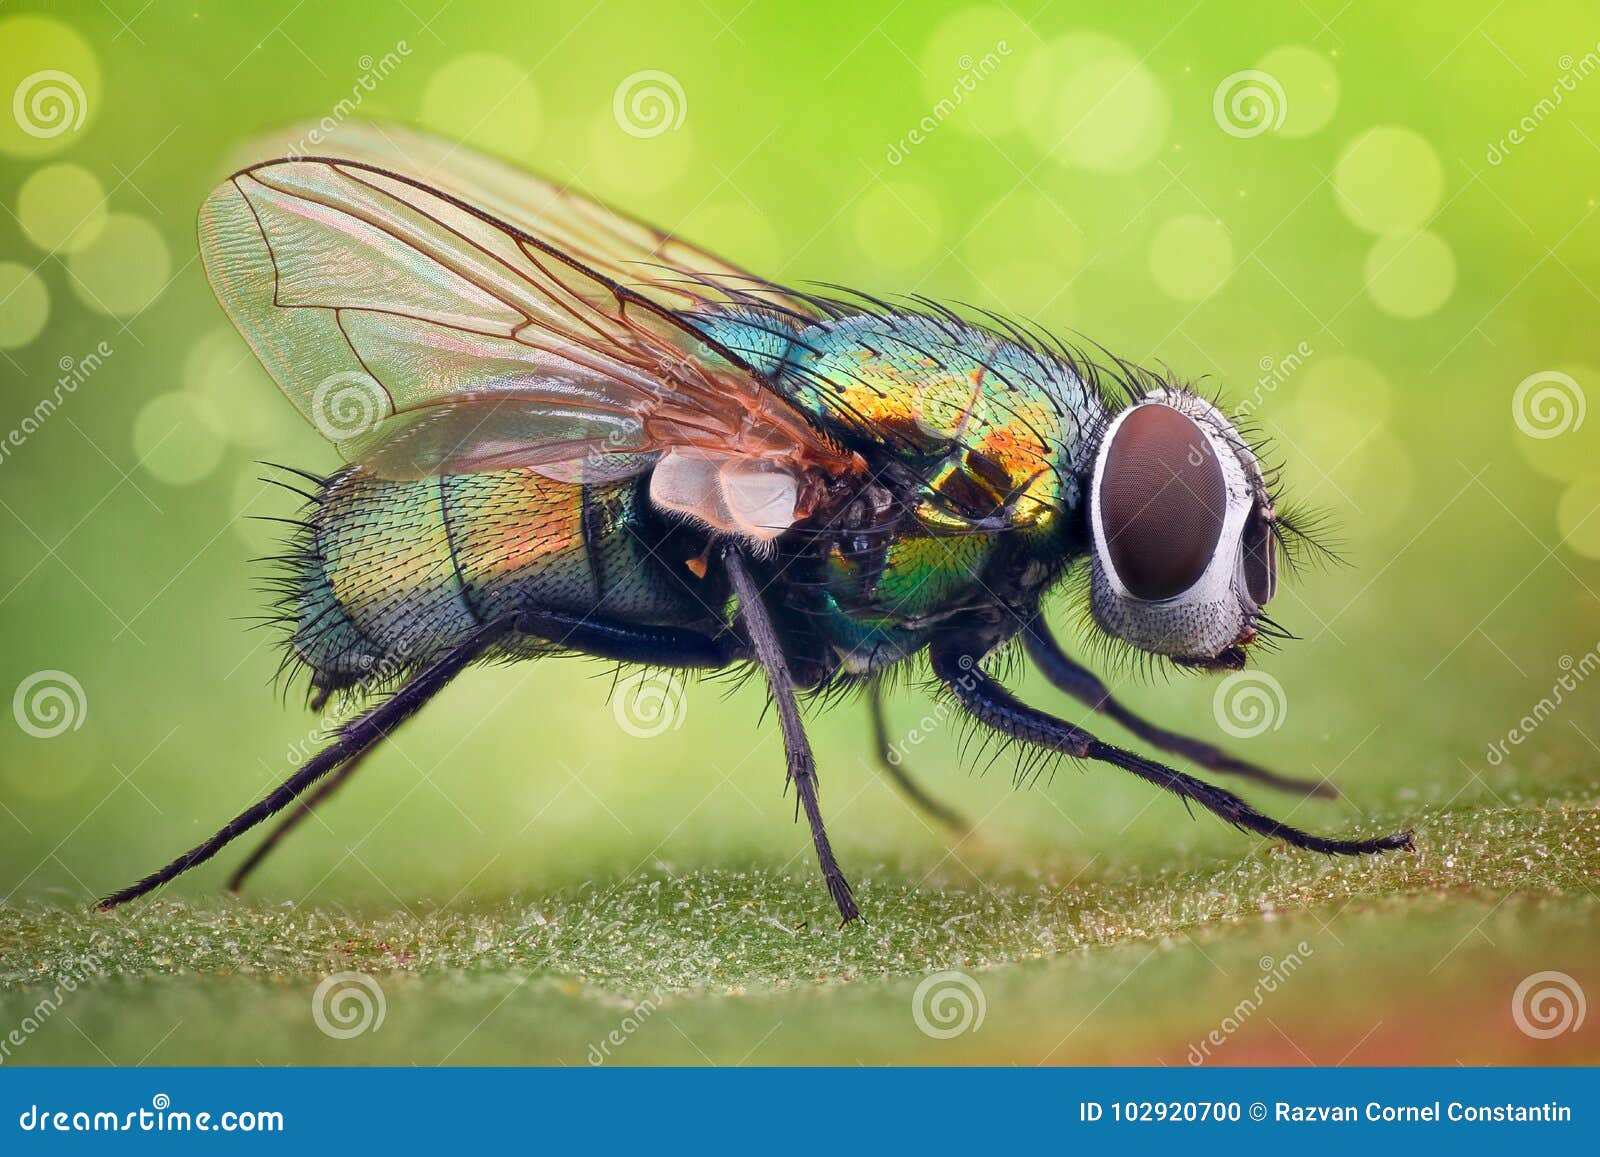 extreme magnification - house fly